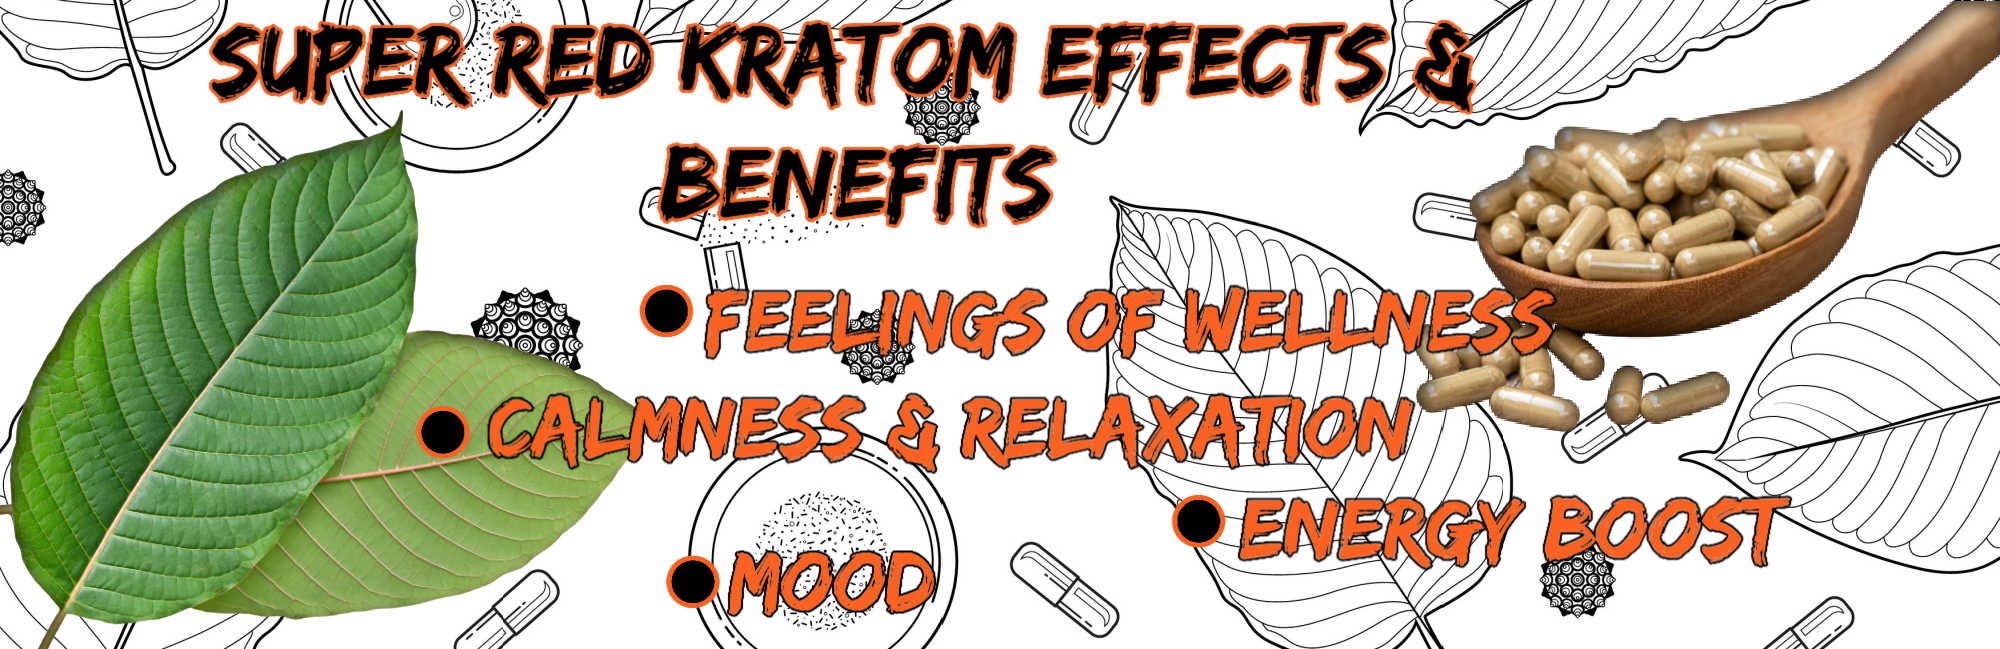 image of super red kratom benefits and effects